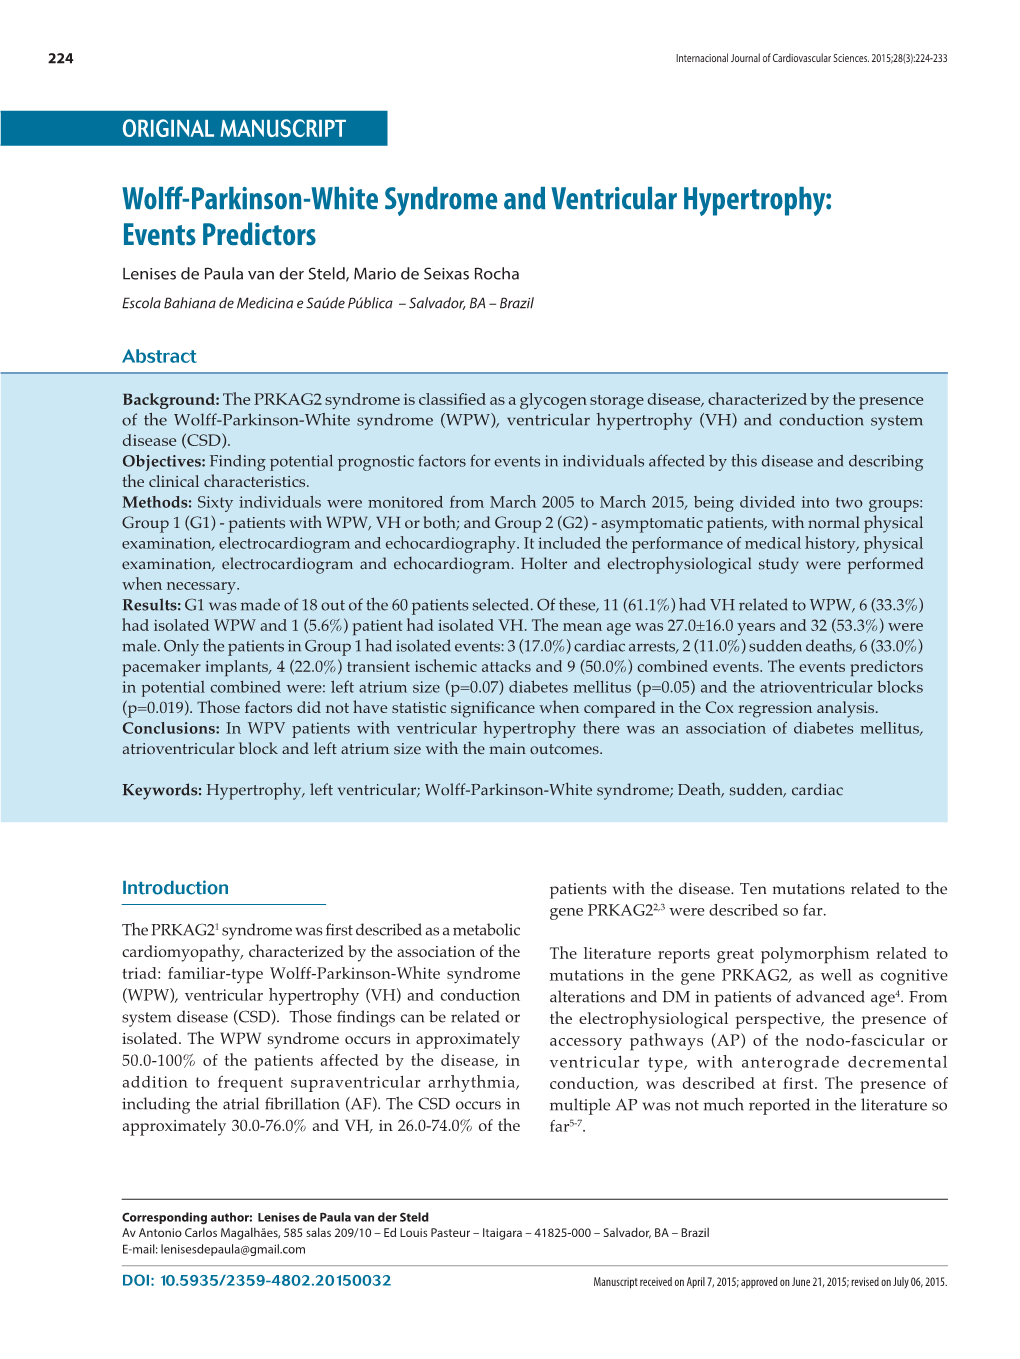 Wolff-Parkinson-White Syndrome and Ventricular Hypertrophy: Events